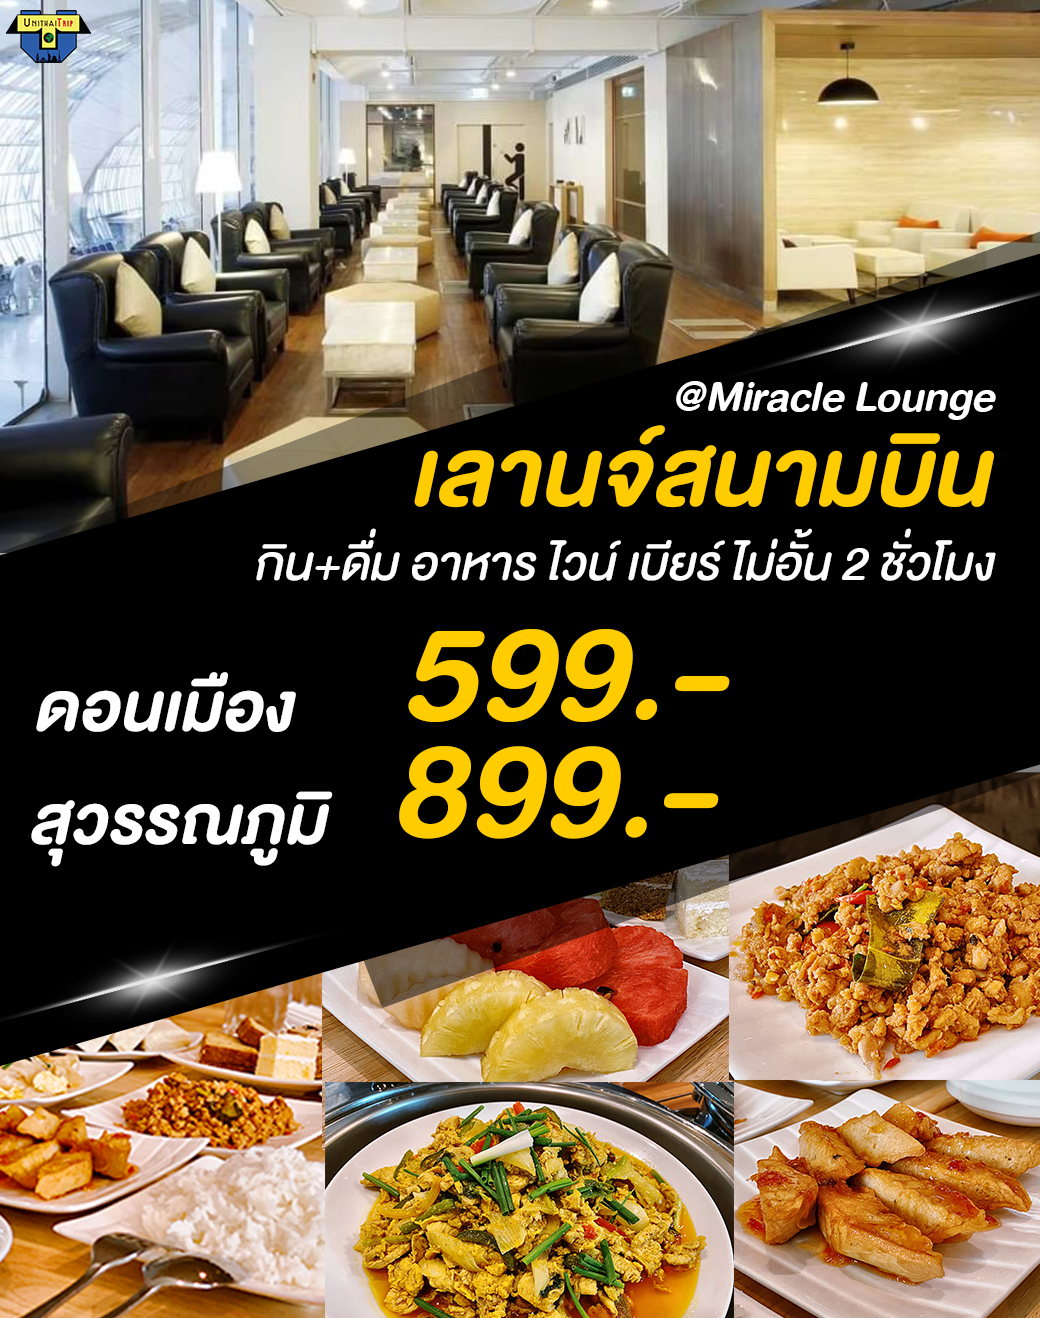 Miracle Lounge by Unithai